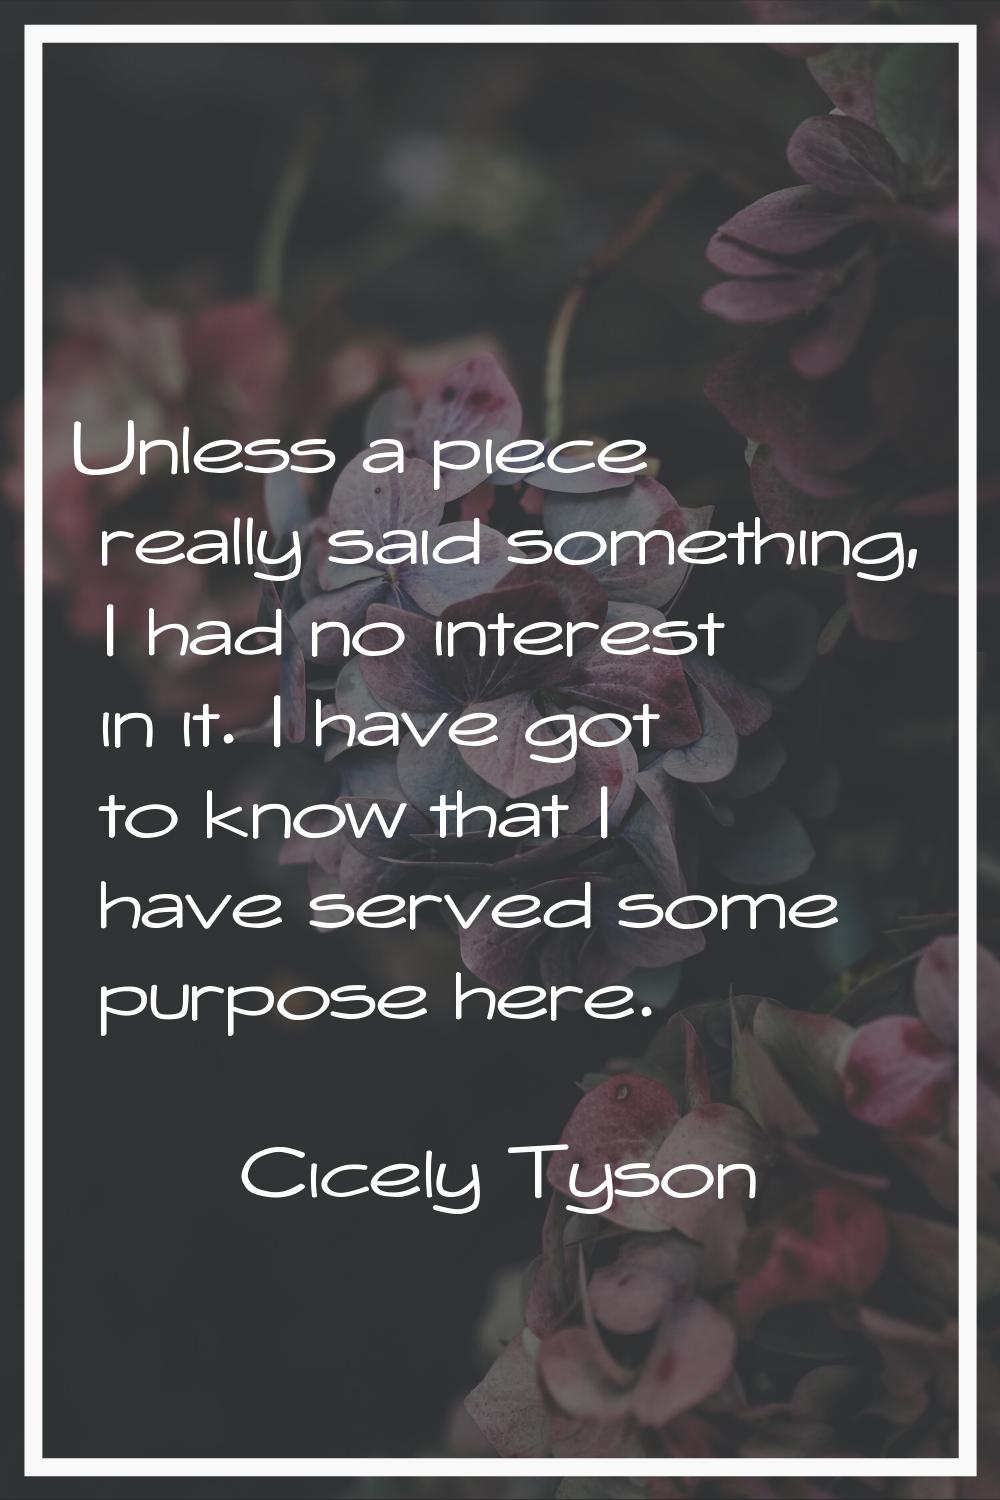 Unless a piece really said something, I had no interest in it. I have got to know that I have serve